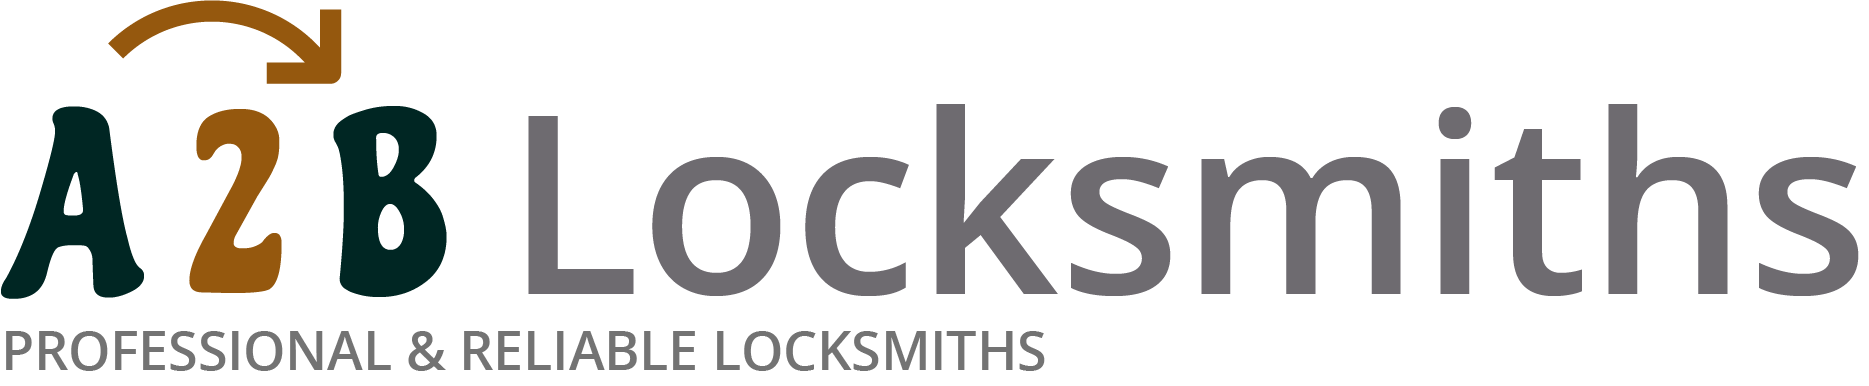 If you are locked out of house in Baldock, our 24/7 local emergency locksmith services can help you.